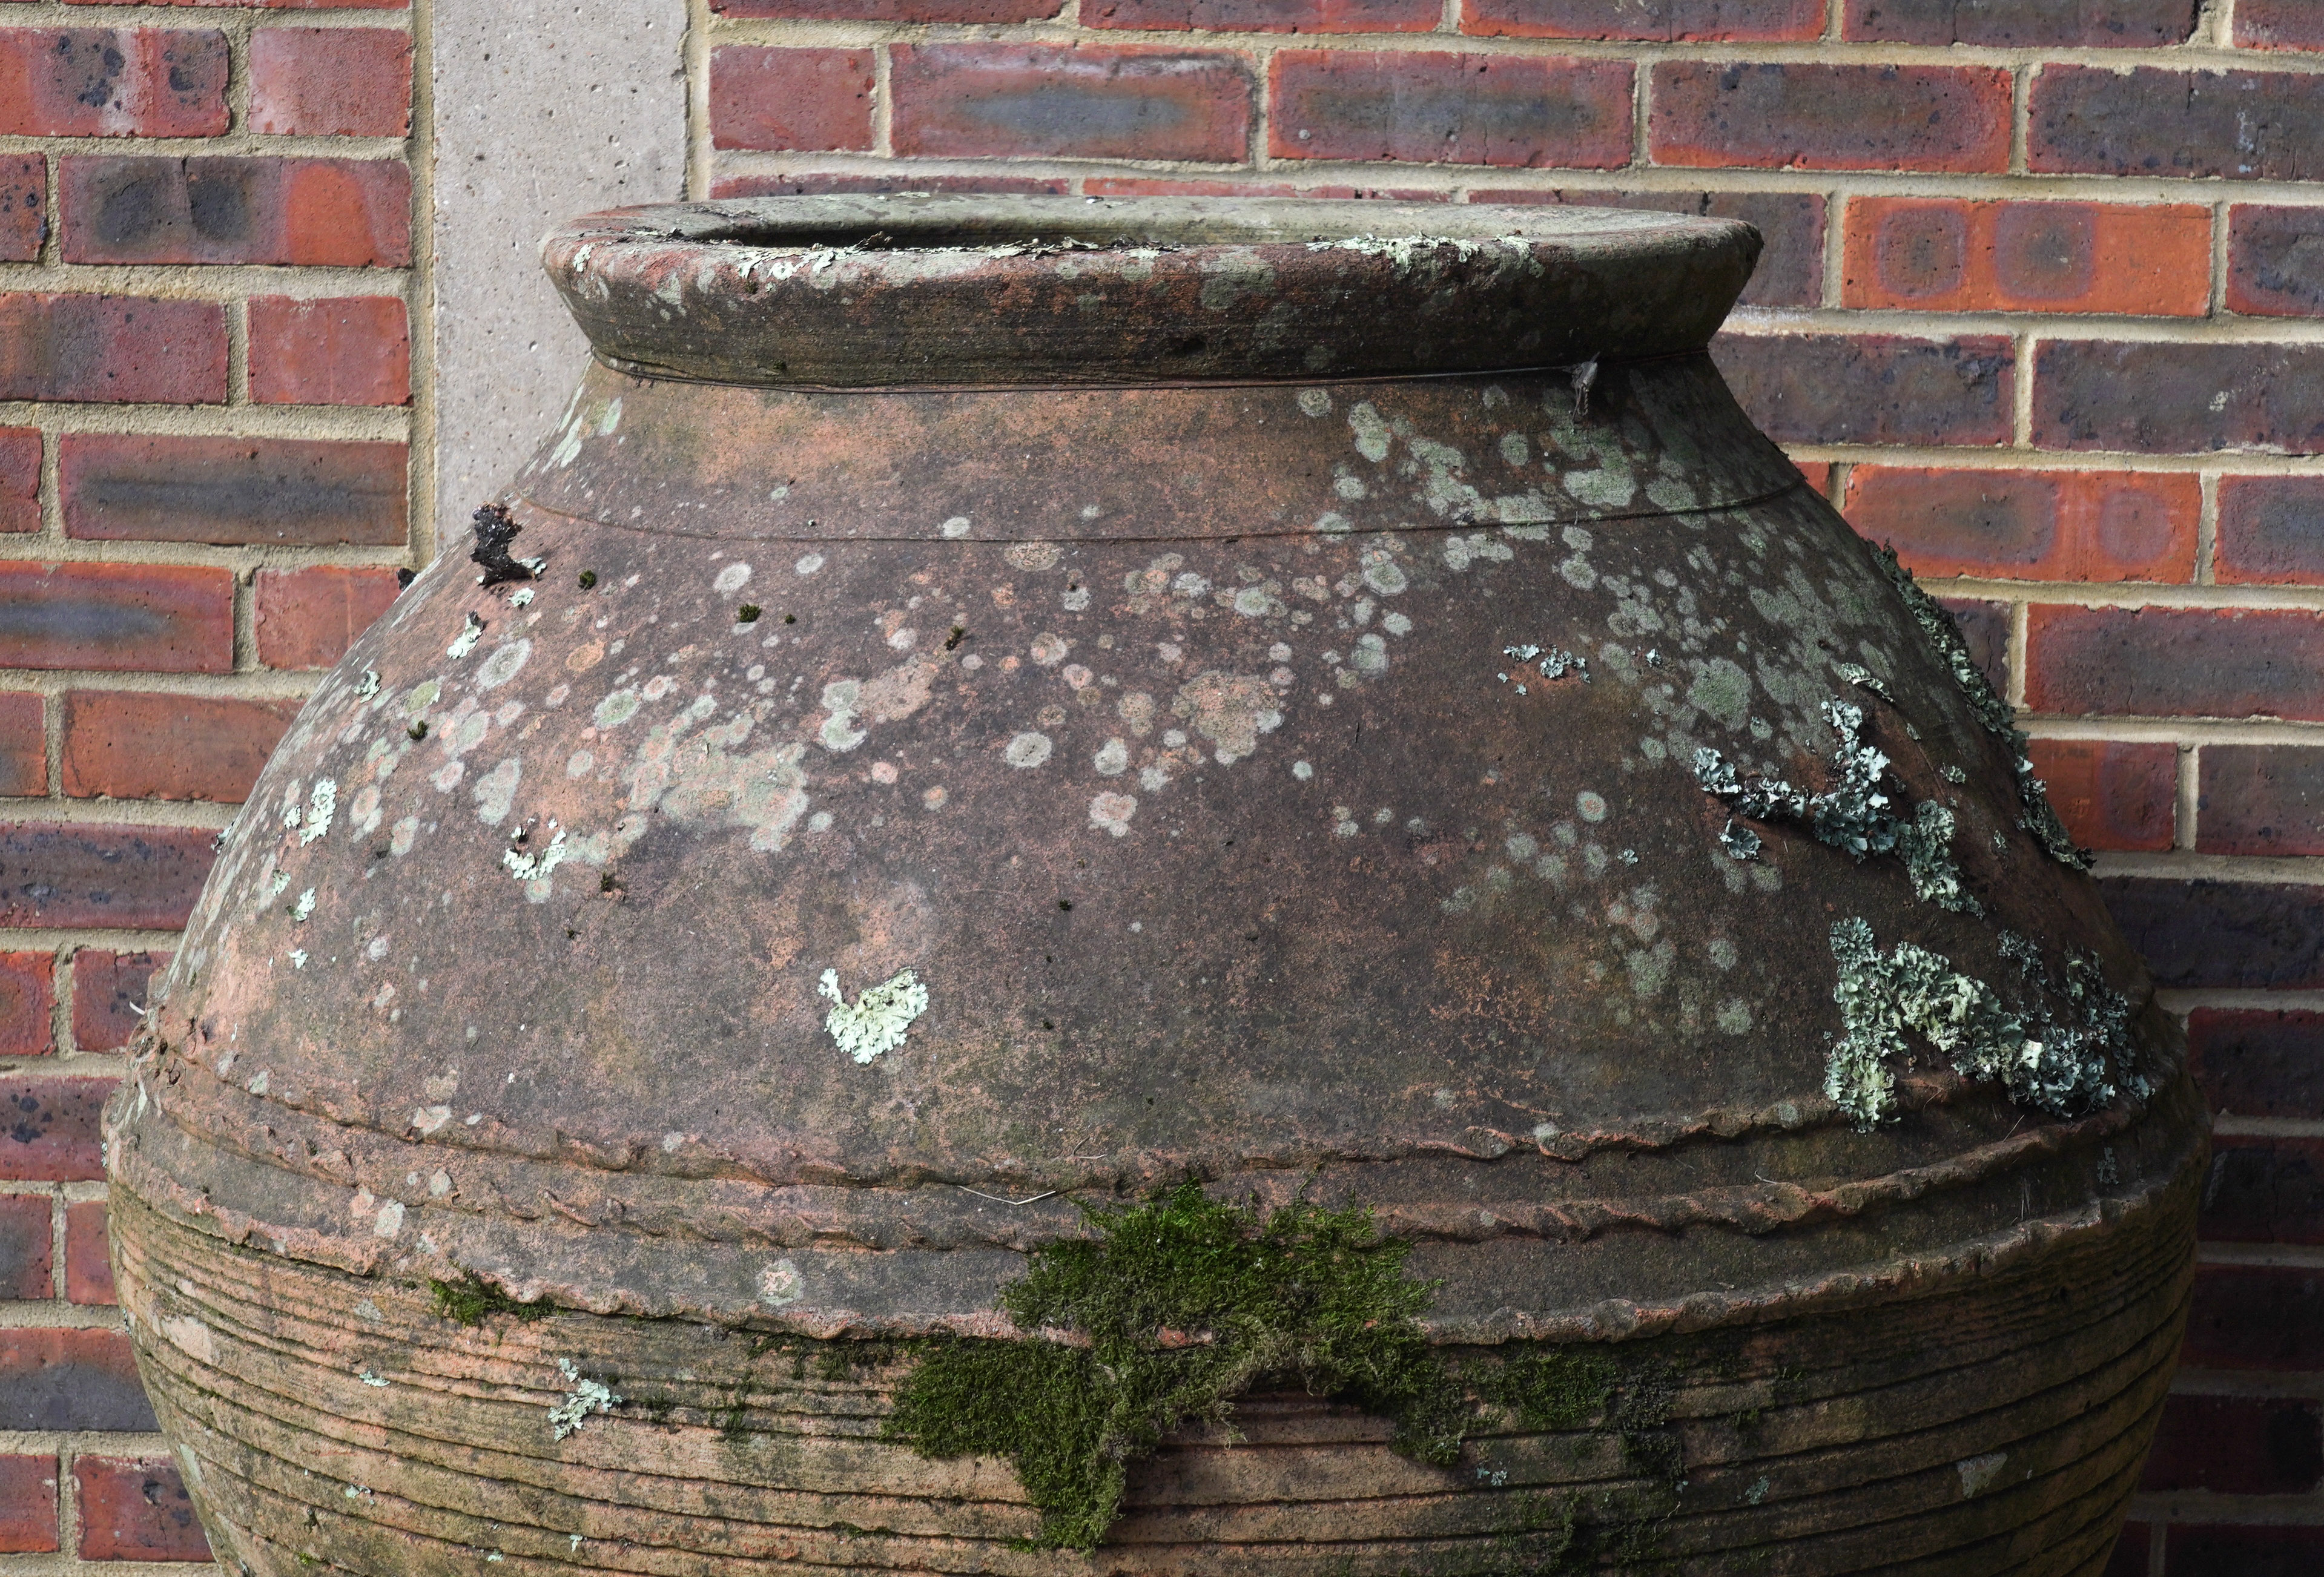 A LARGE TERRACOTTA OIL JAR - Image 3 of 4